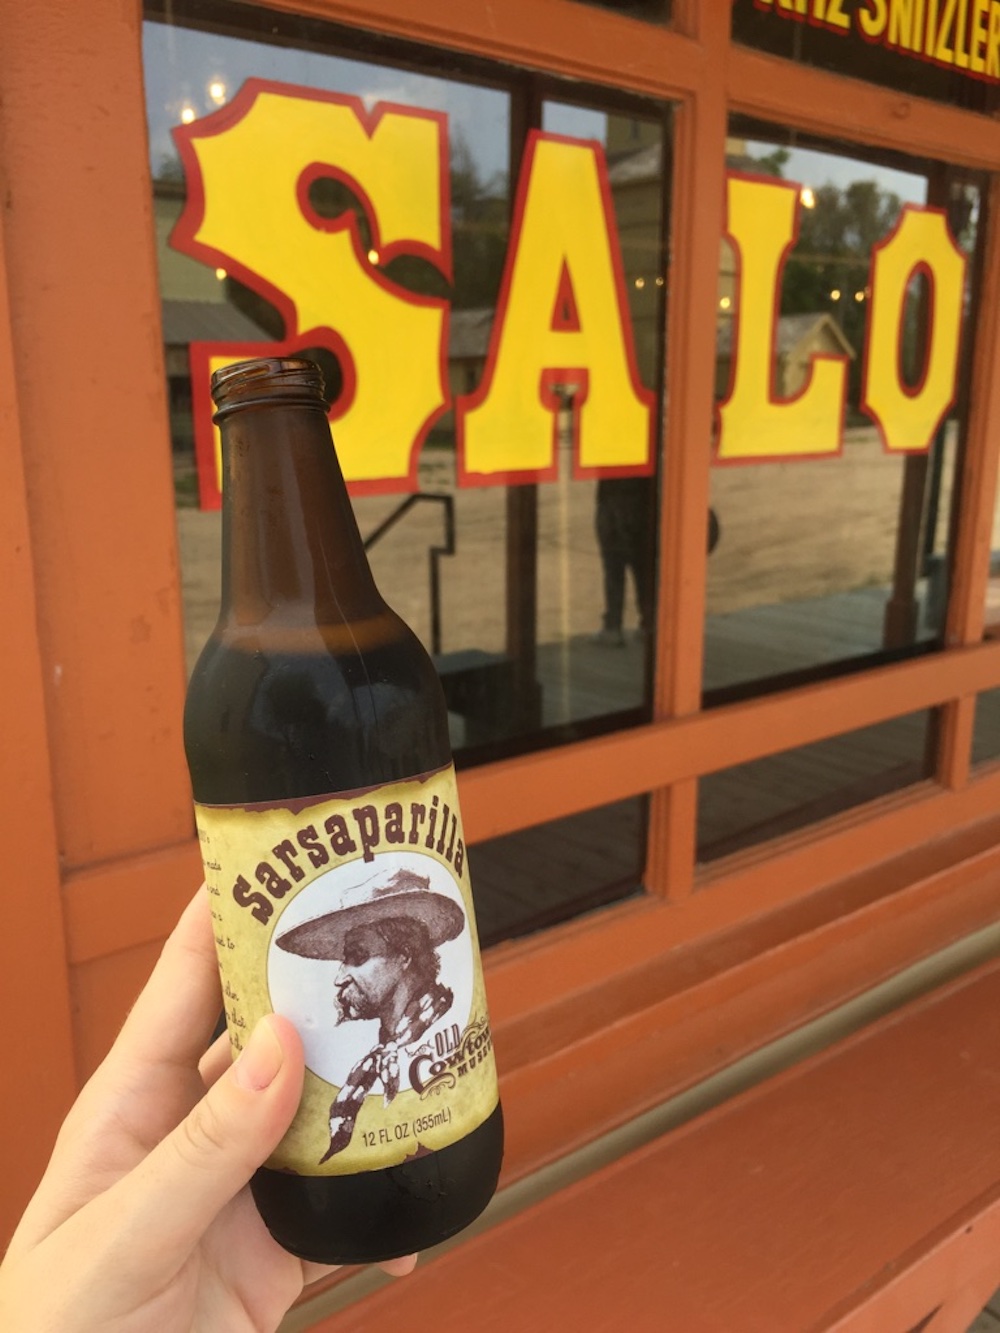 Bottle of sarsparilla outside of the Saloon at Old Cowtown Museum in Wichita, Kansas